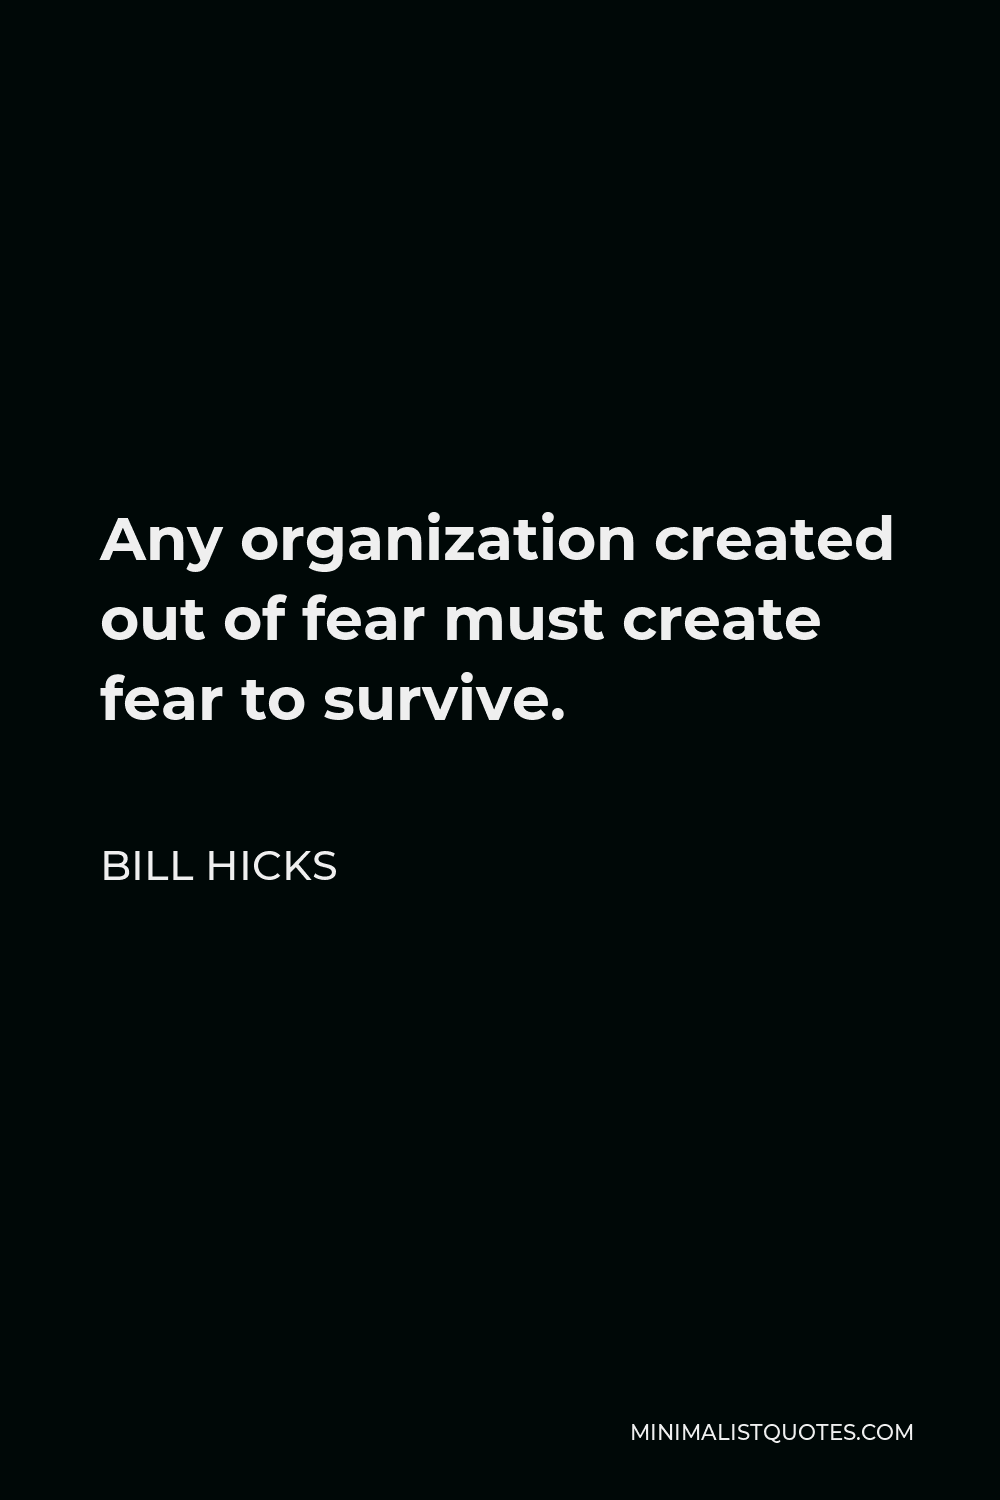 Bill Hicks Quote - Any organization created out of fear must create fear to survive.